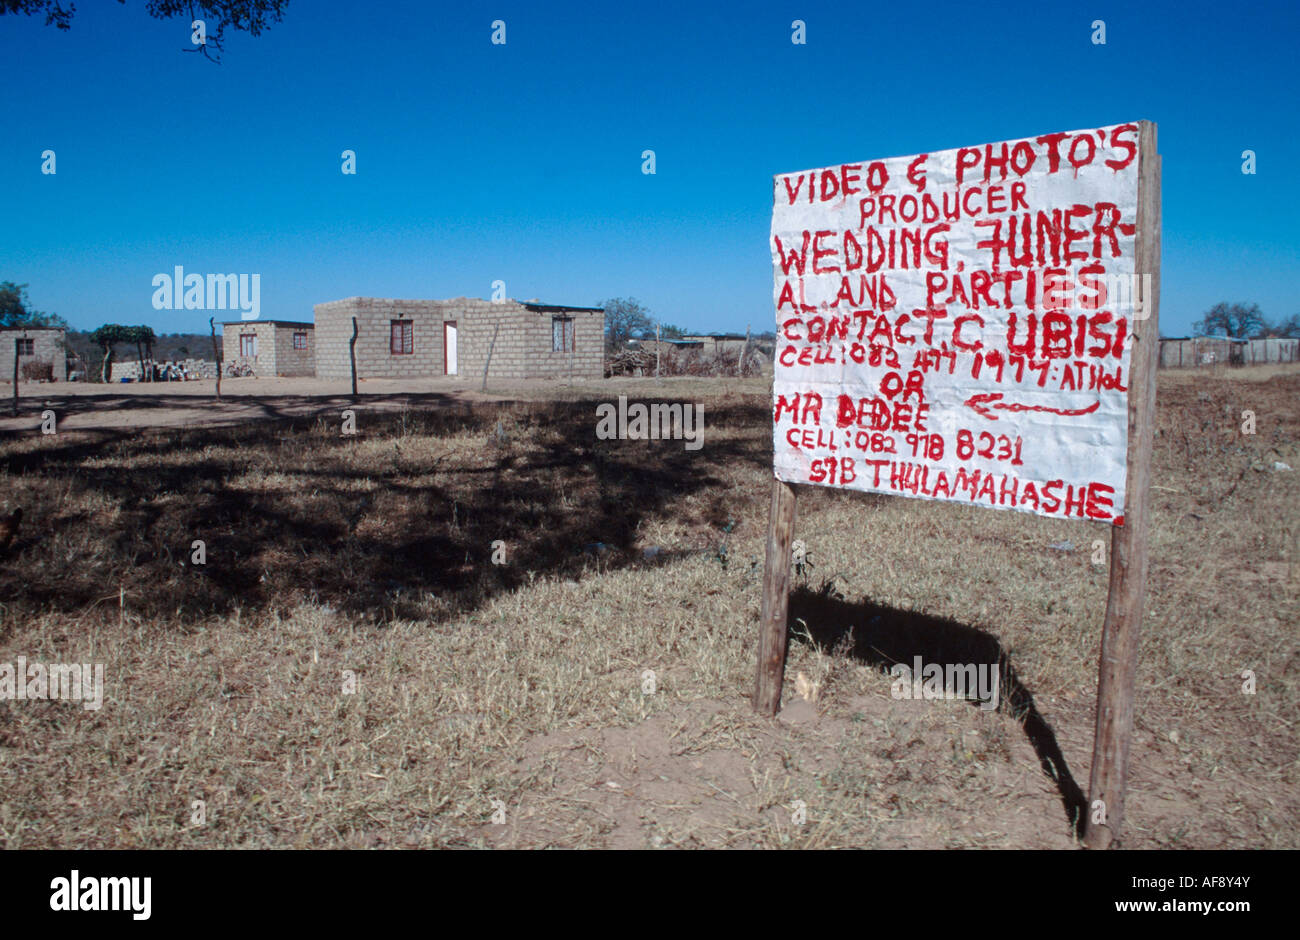 A signpost in rural Africa advertising a small business which does videos and photography at weddings and funerals Stock Photo